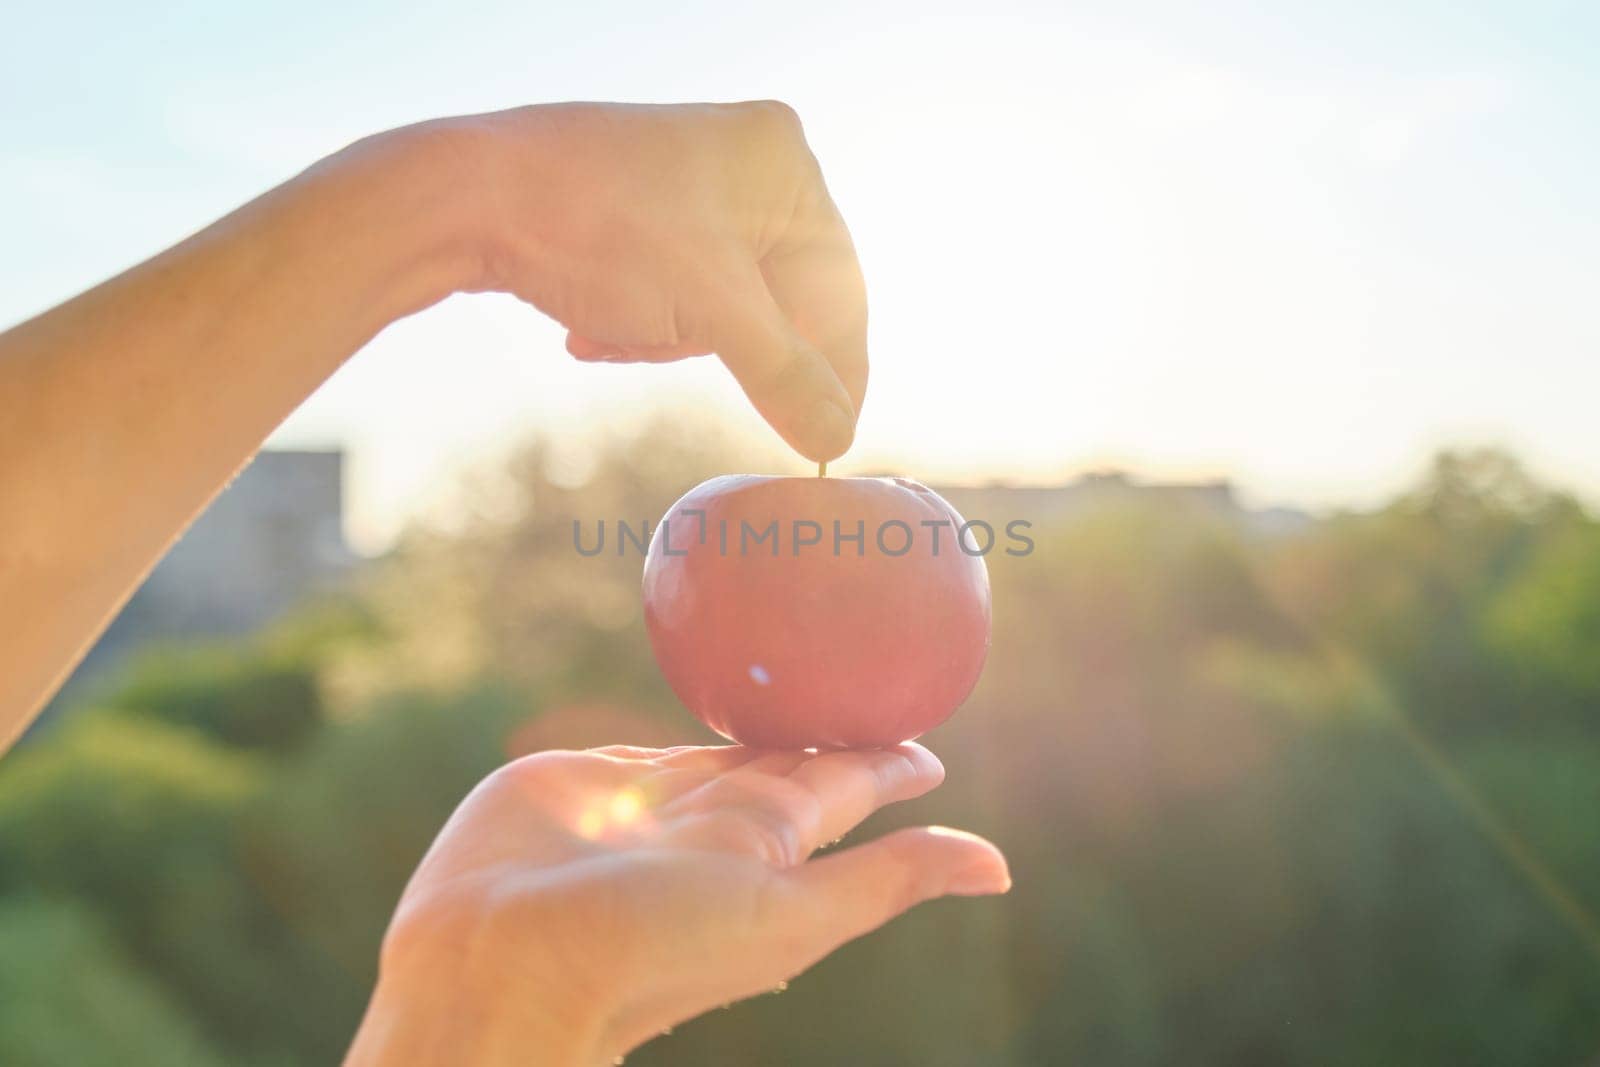 One red apple in a hand close-up, nature sunset sky background.